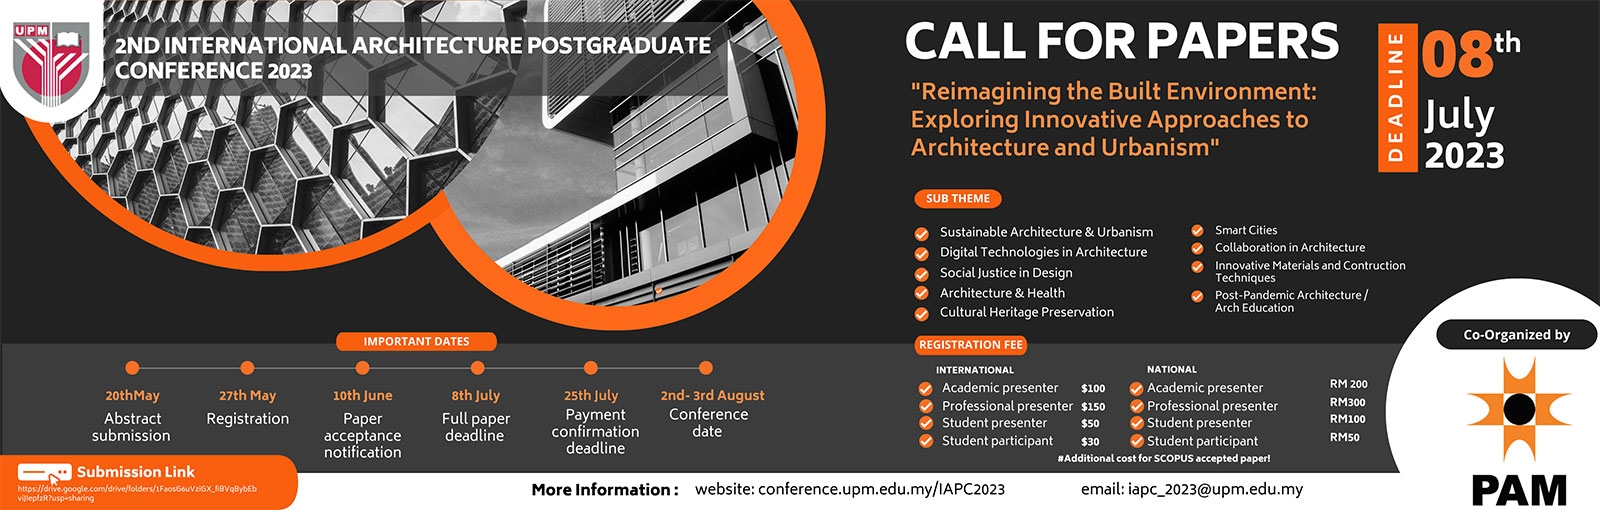 2nd International Architectural Post Graduate Conference 2023